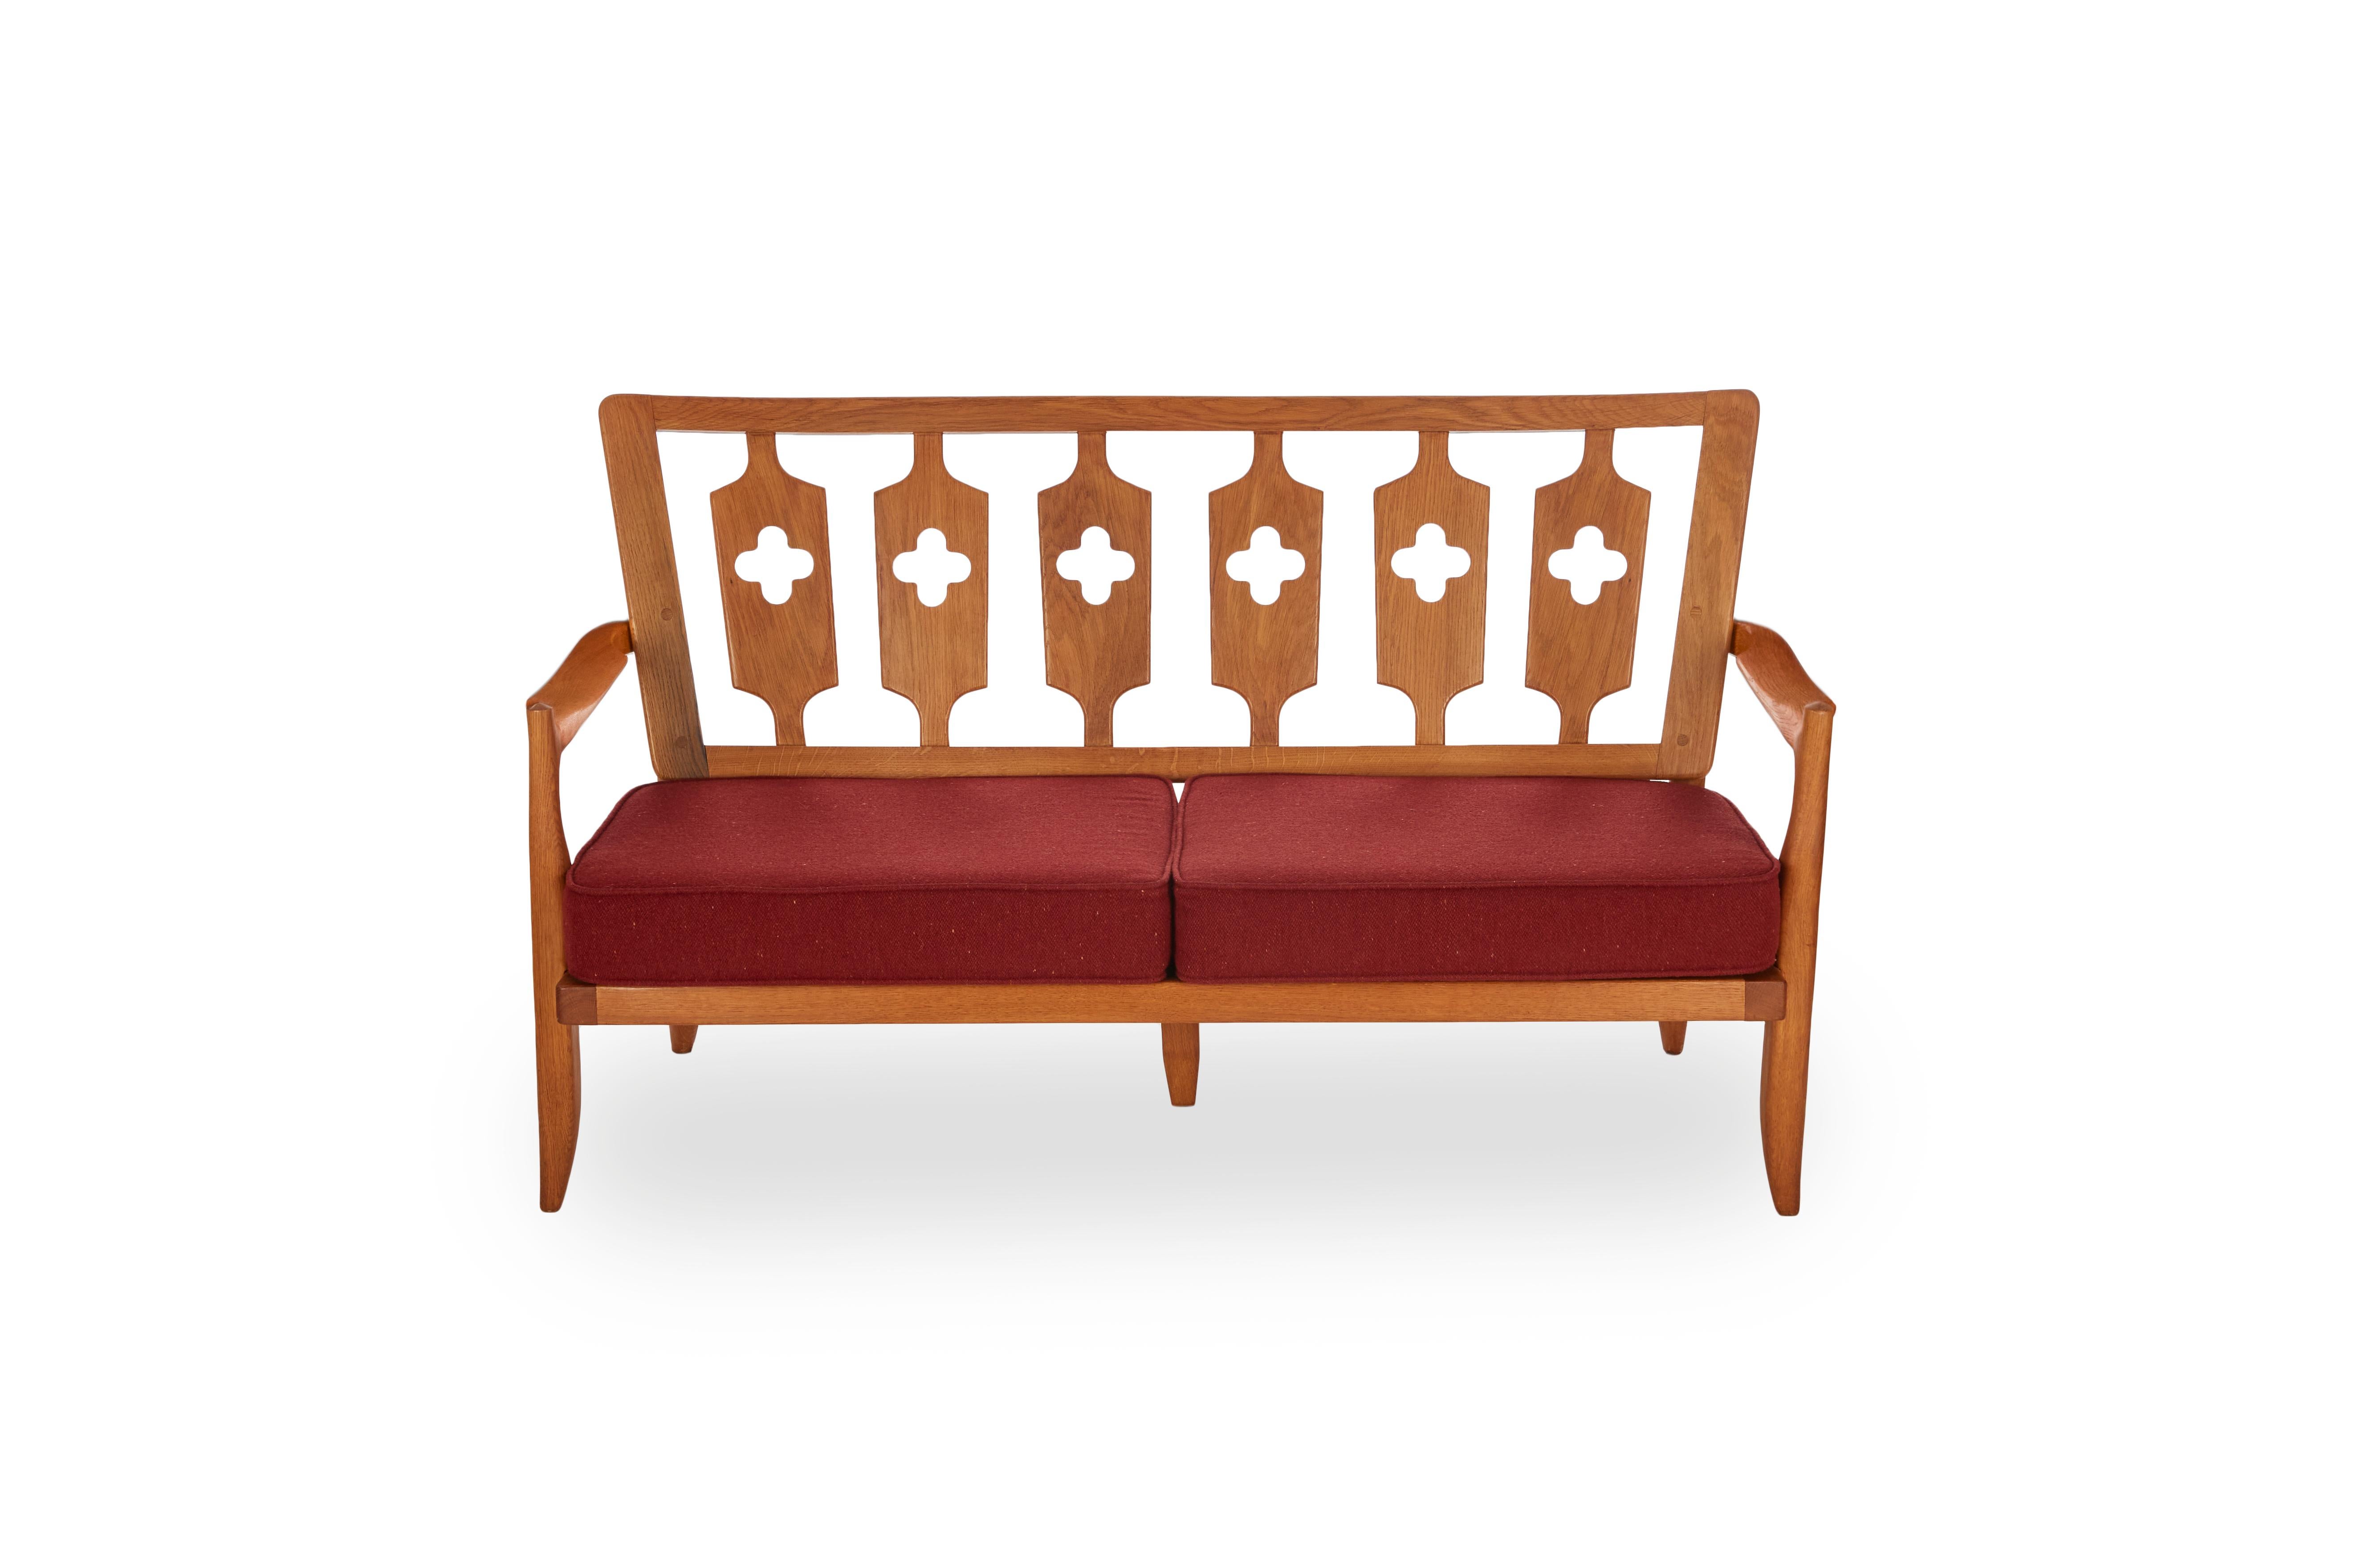 This elegant midcentury polished oak sofa by the celebrated French designer Robert Guillerme was created as part of a line of design he produced for the company Votre Maison.

Guillerme placed equal emphasis on function and aesthetics, creating an